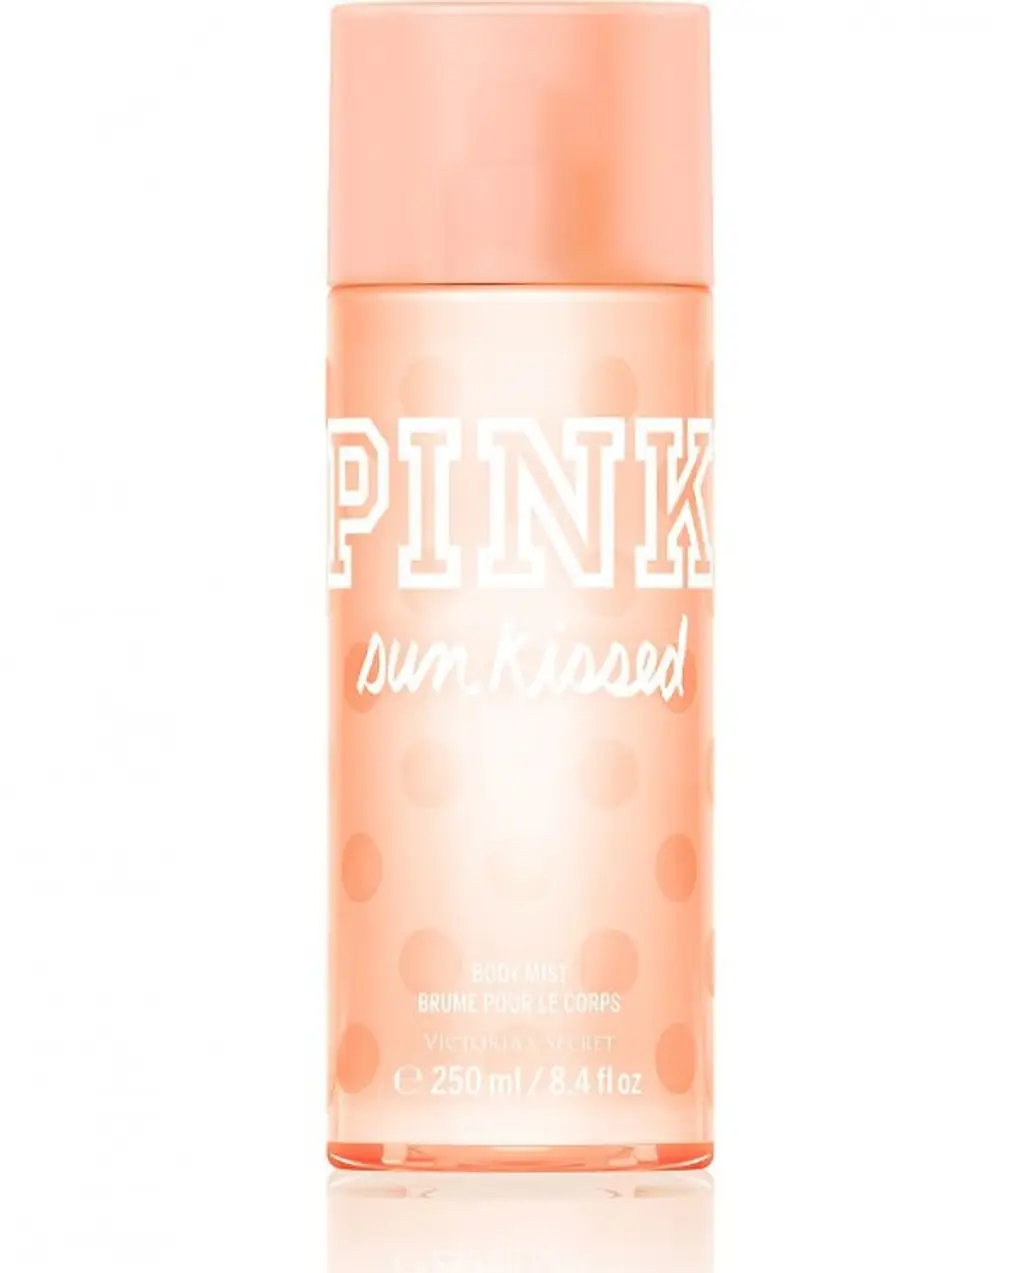 Trade in Heavy Perfume for a Light Scent with Victoria’s Secret Sun Kissed Body Mist